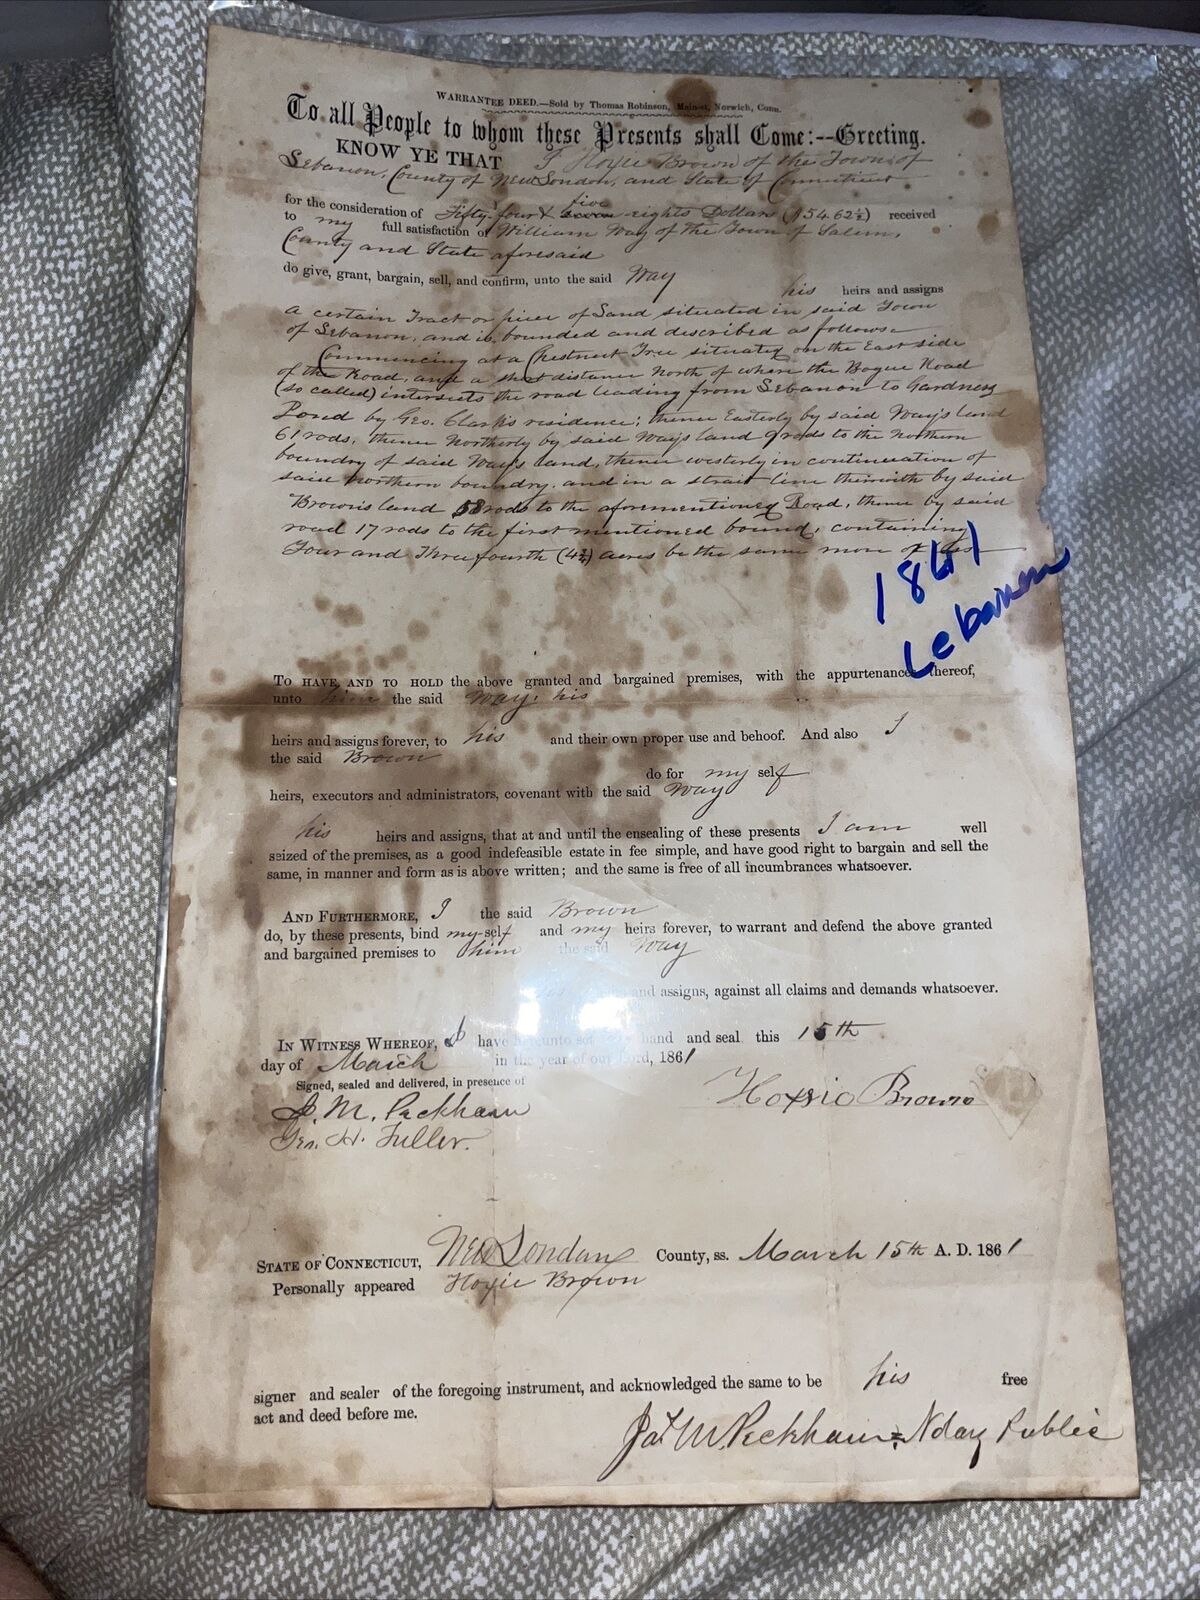 1861 Lebanon CT Warrantee Deed for Property “commencing at a chestnut tree”